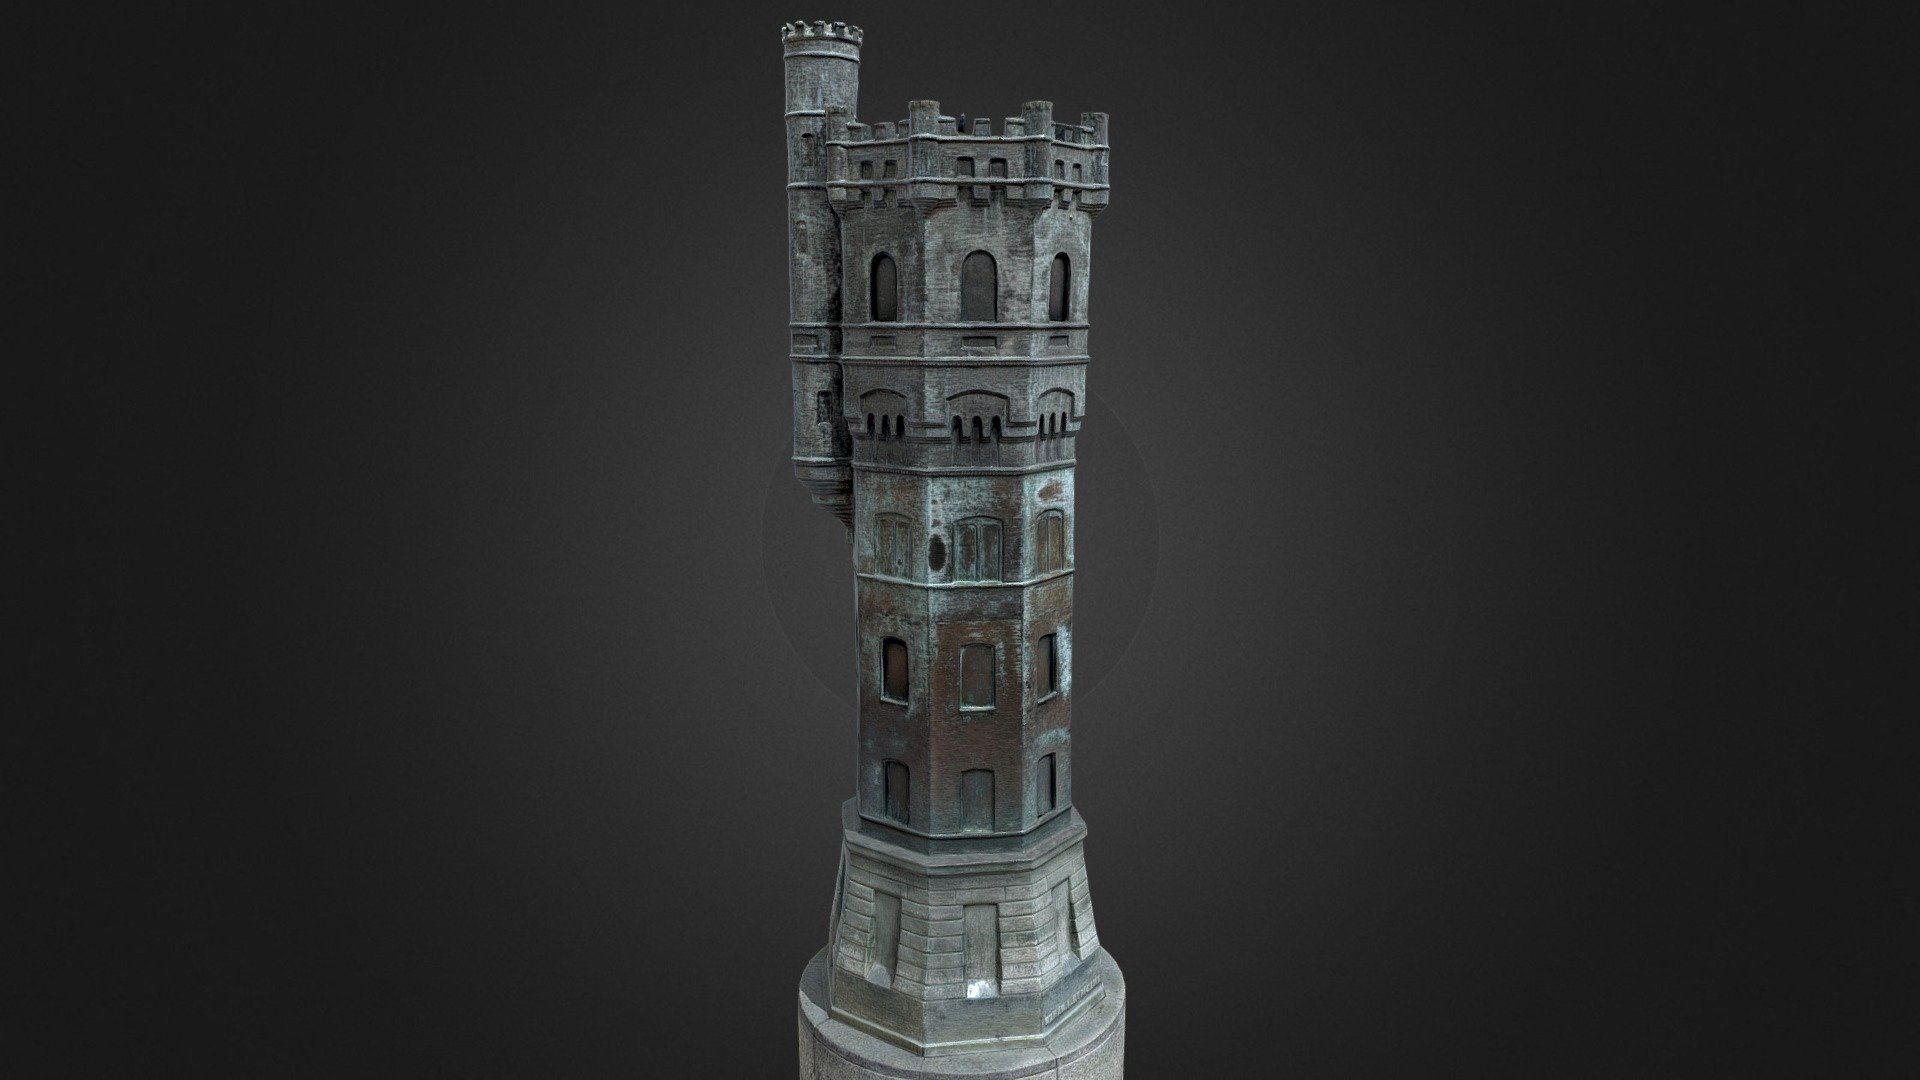 A fountain with a copper water tower built in the middle.

Photogrammetric scan (82 x 12MP 4:3); captured 27 Feb 2023, converted to low-poly mesh; processed in Metashape, editing and decimation done in blender, model includes:




4k    80%JPG   diffuse texture

4k    80%JPG   normal map

4k    80%JPG   ambient occlusion

2k    80%JPG   ambient occlusion

1k    80%JPG   ambient occlusion

Size: ~ 0.6 x 0.6 x 2.5 meters

Fountain located in Lublin, Poland (https://osm.org/go/0kBUjp0N9?m=)

 - Fountain with a water tower - Download Free 3D model by Seweryn Stachula (@seweryn.stachula) 3d model